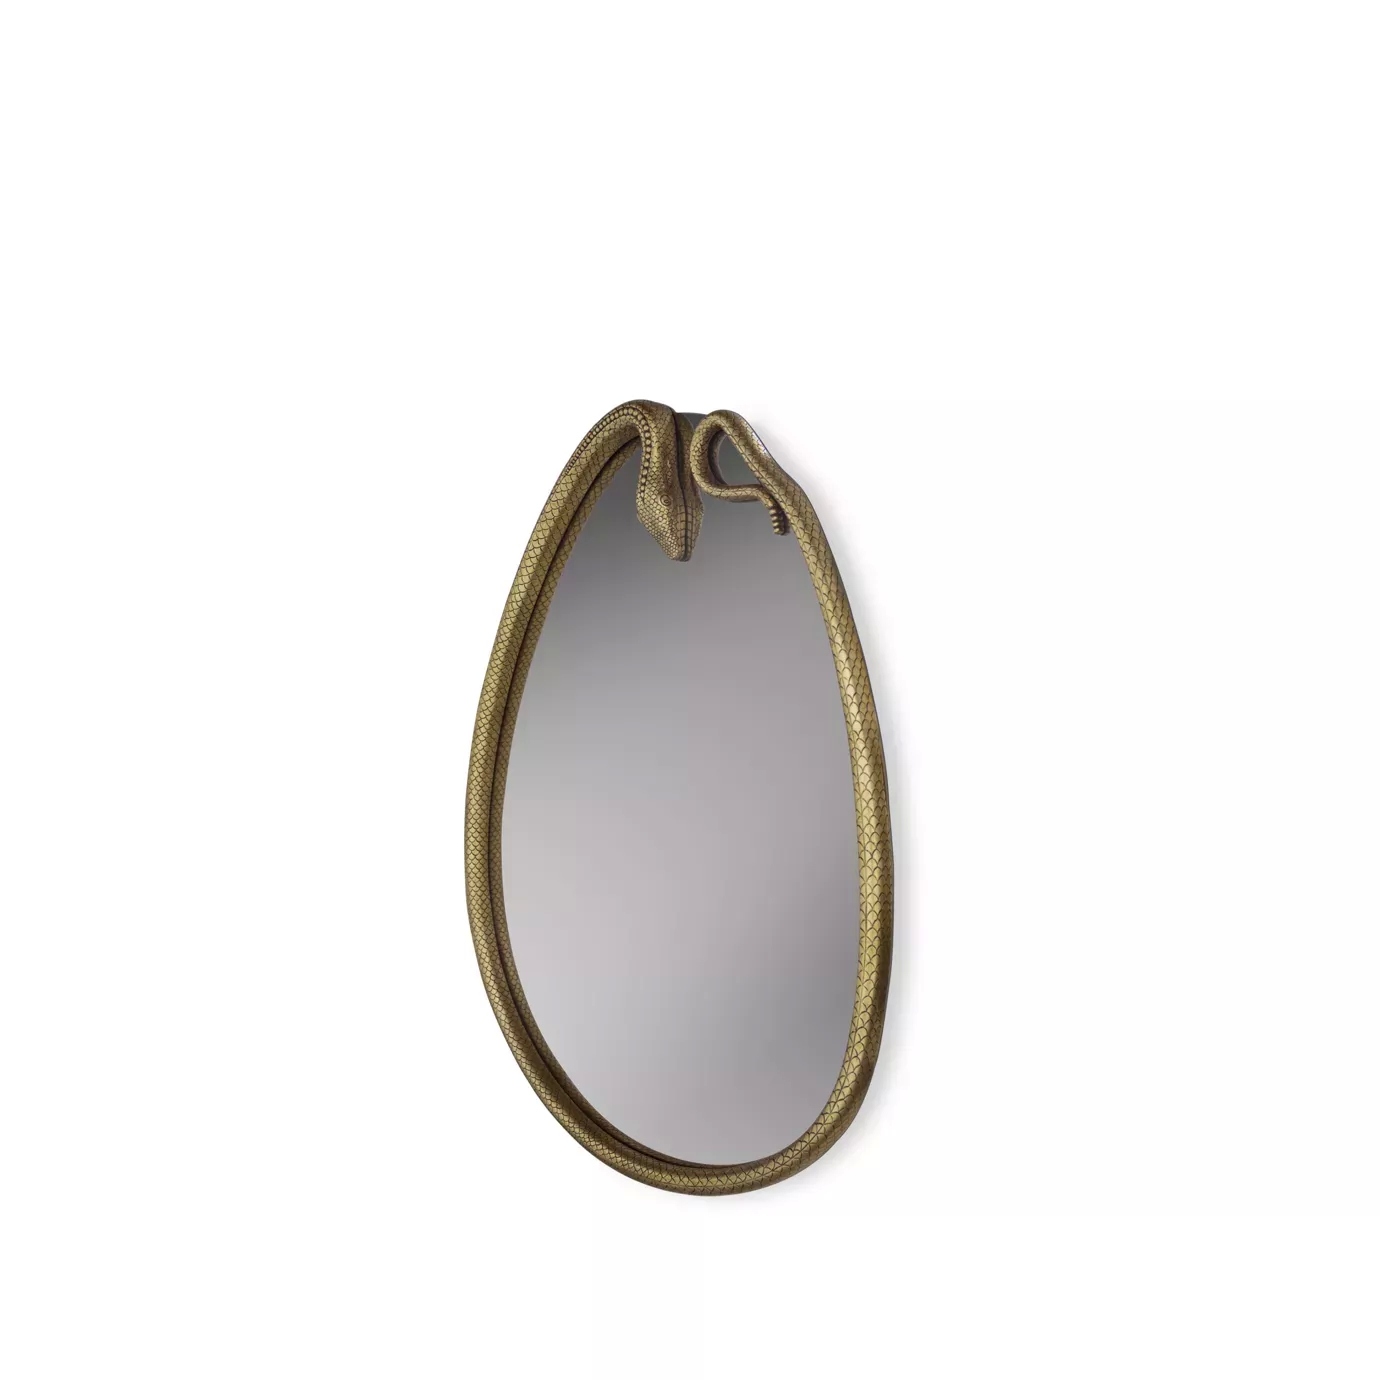 Be transformed as you gaze into the Serpentine's pear-shaped mirror.